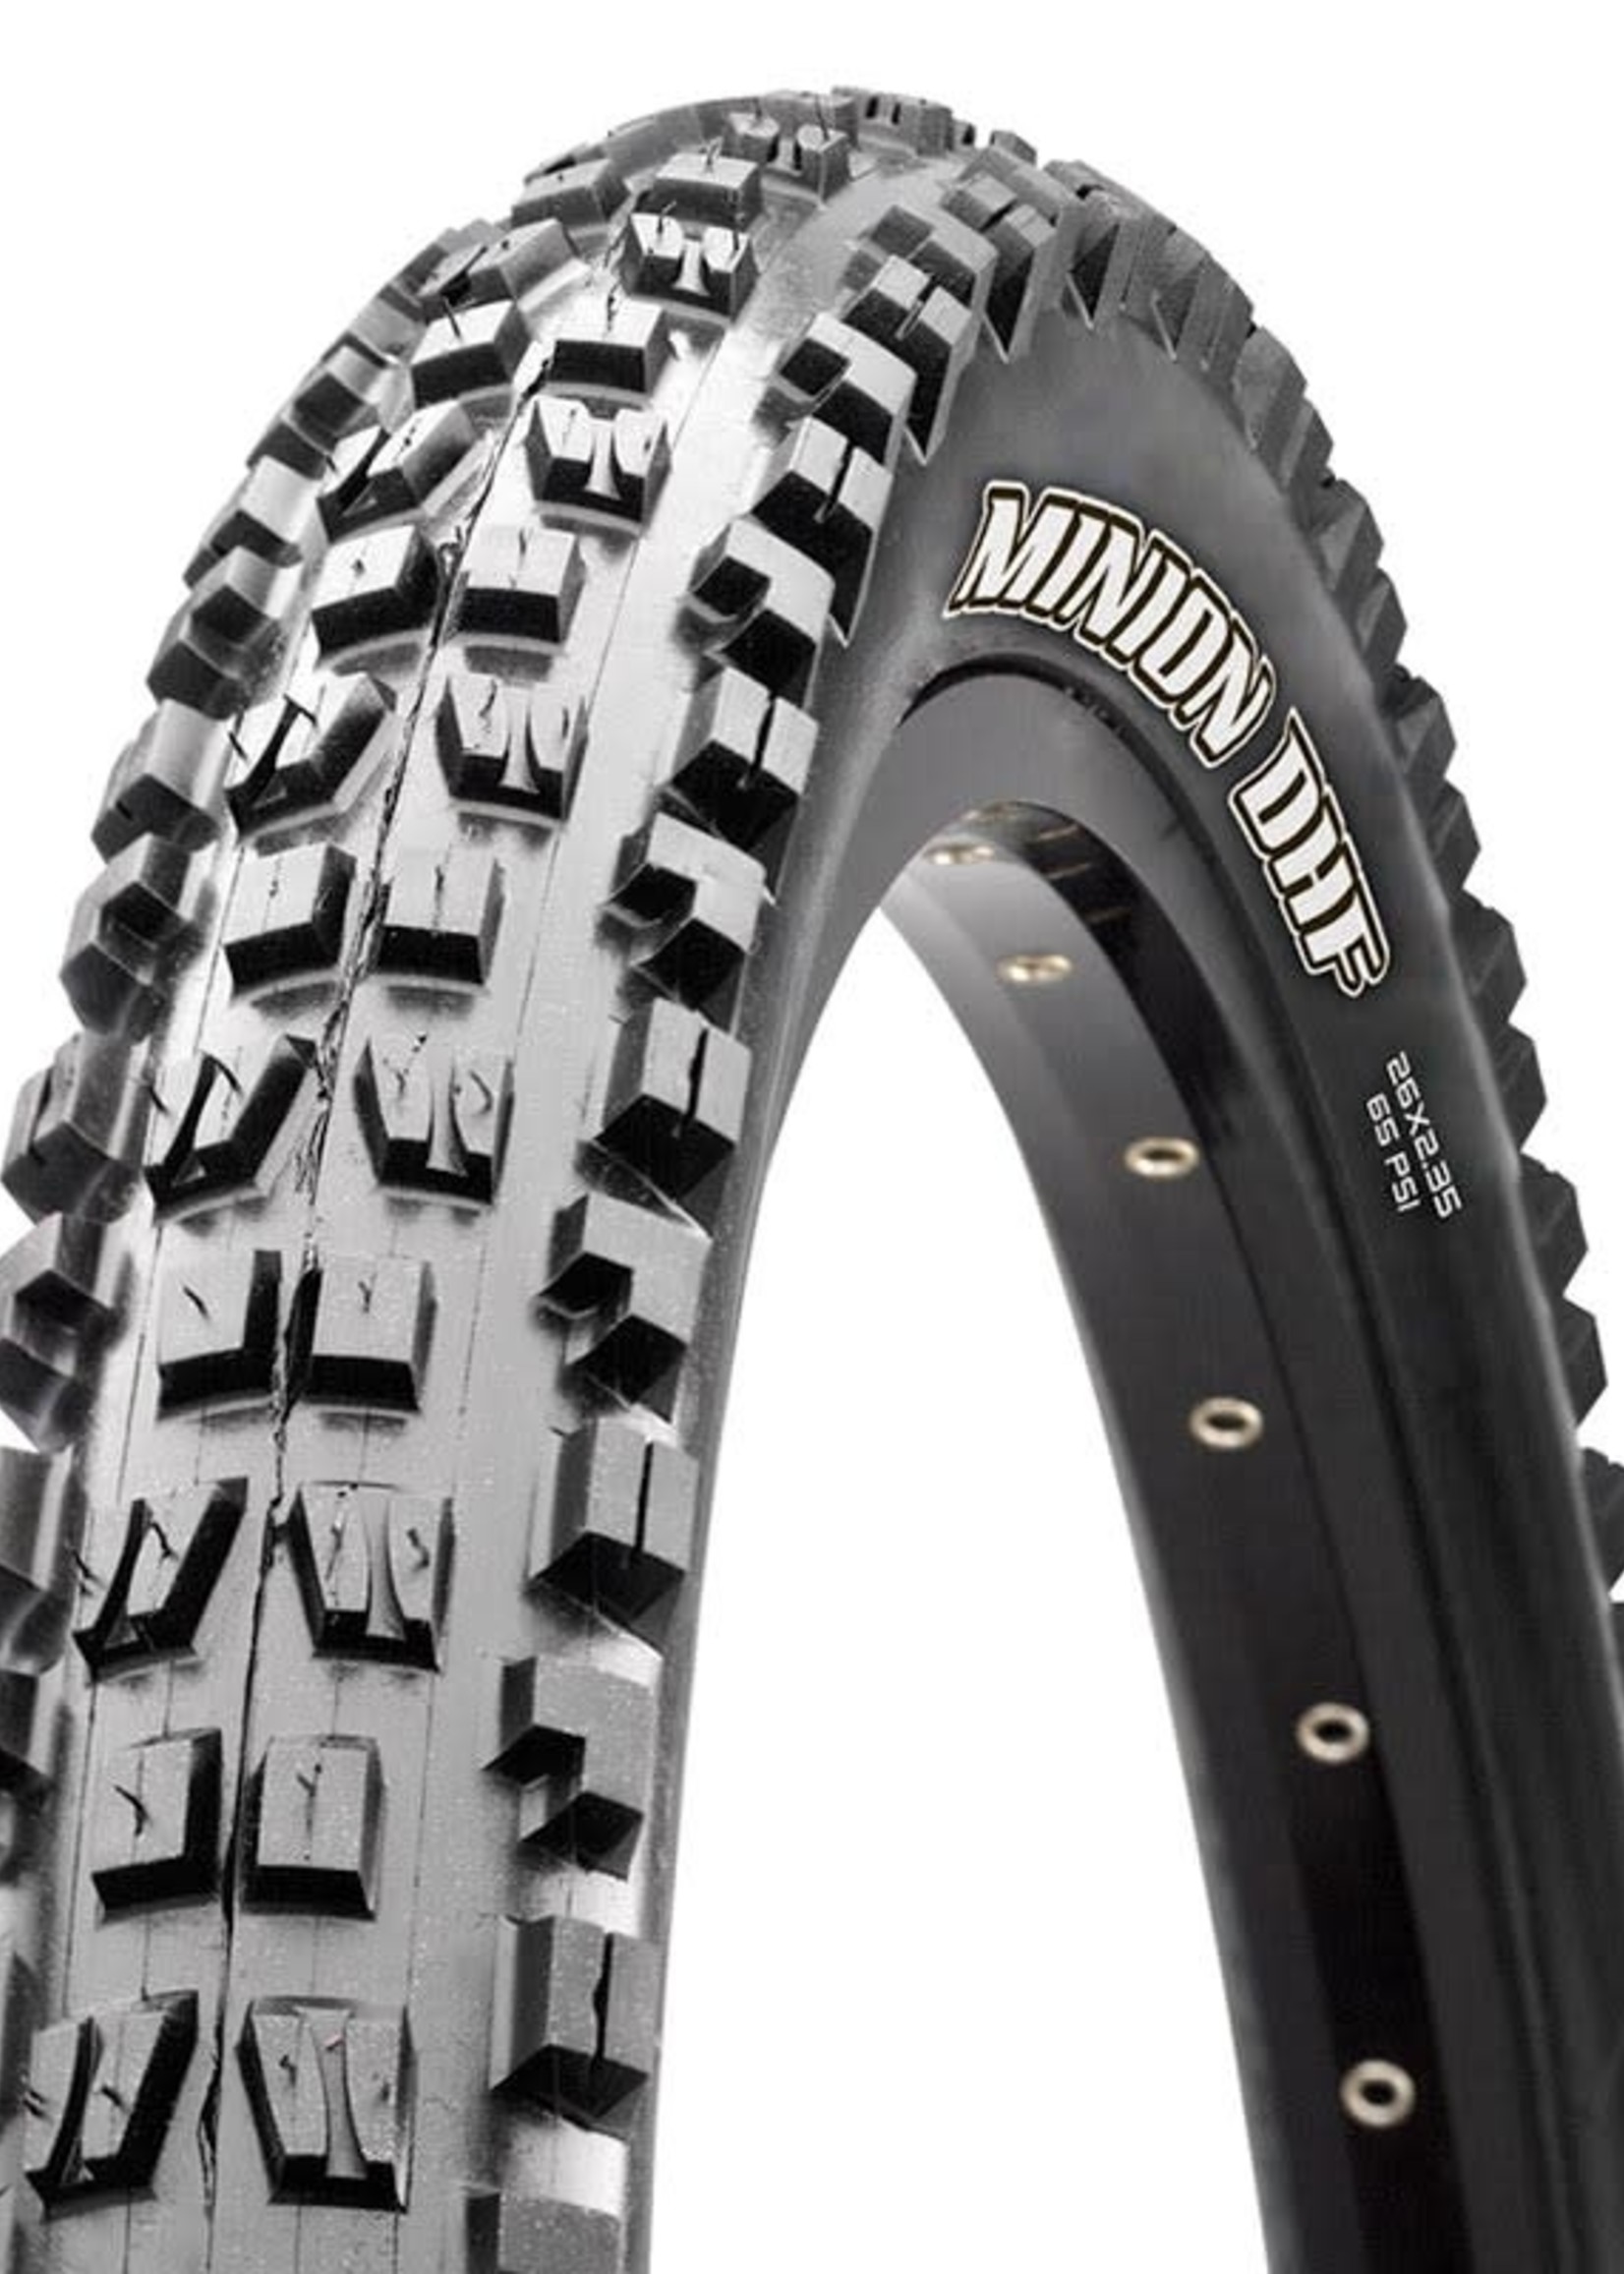 MAXXIS Maxxis DHF 24